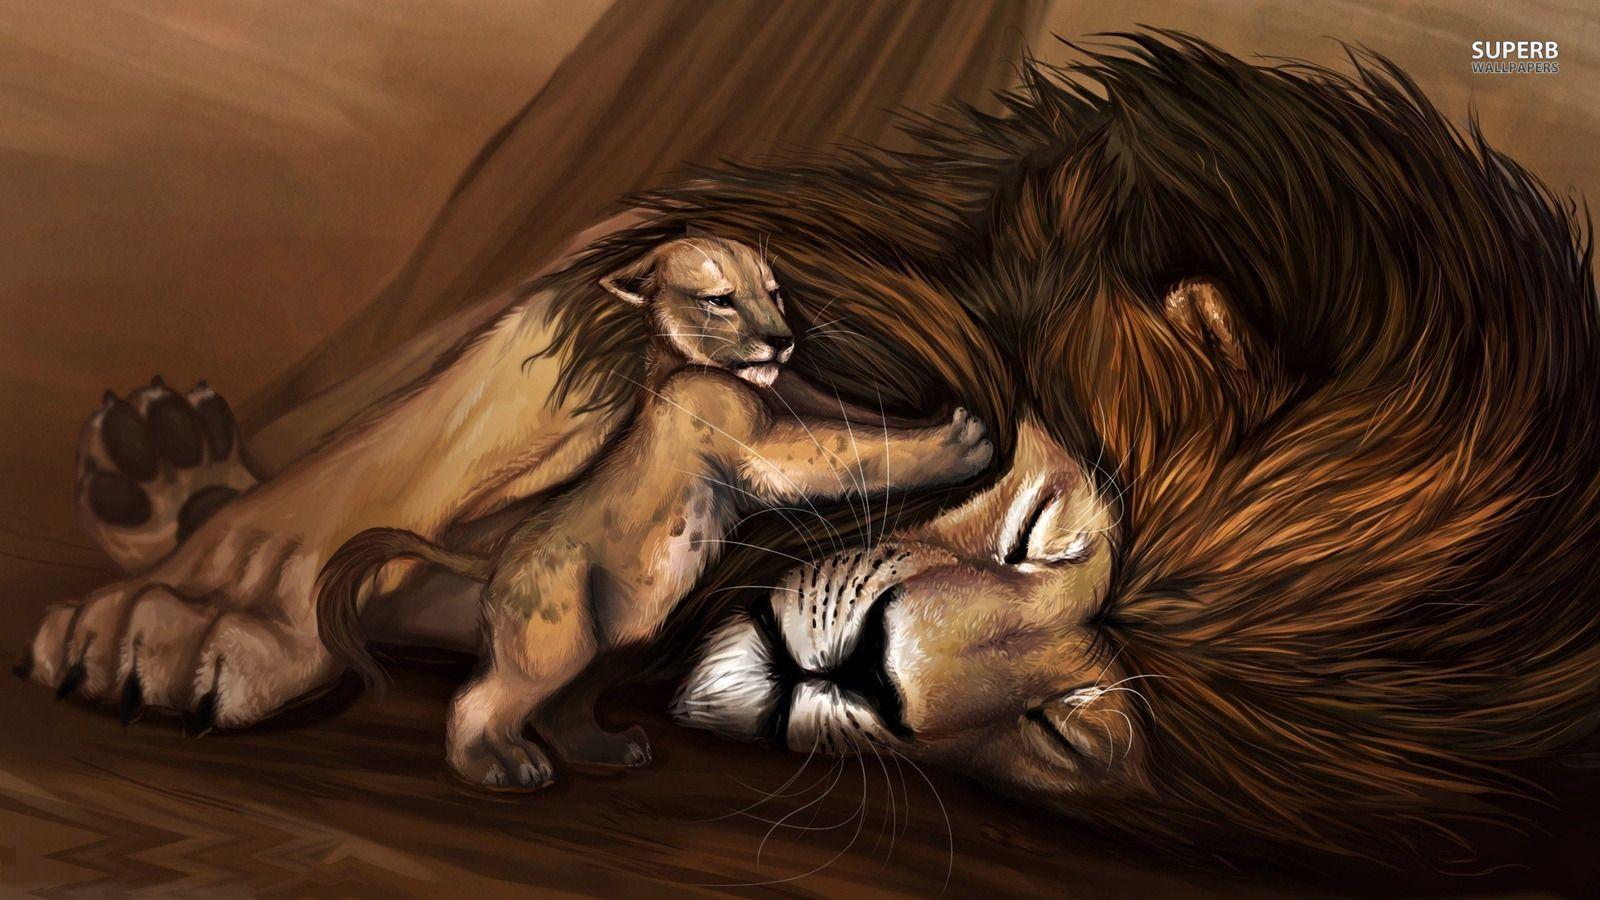 The Lion King image Simba and Mufasa HD wallpaper and background